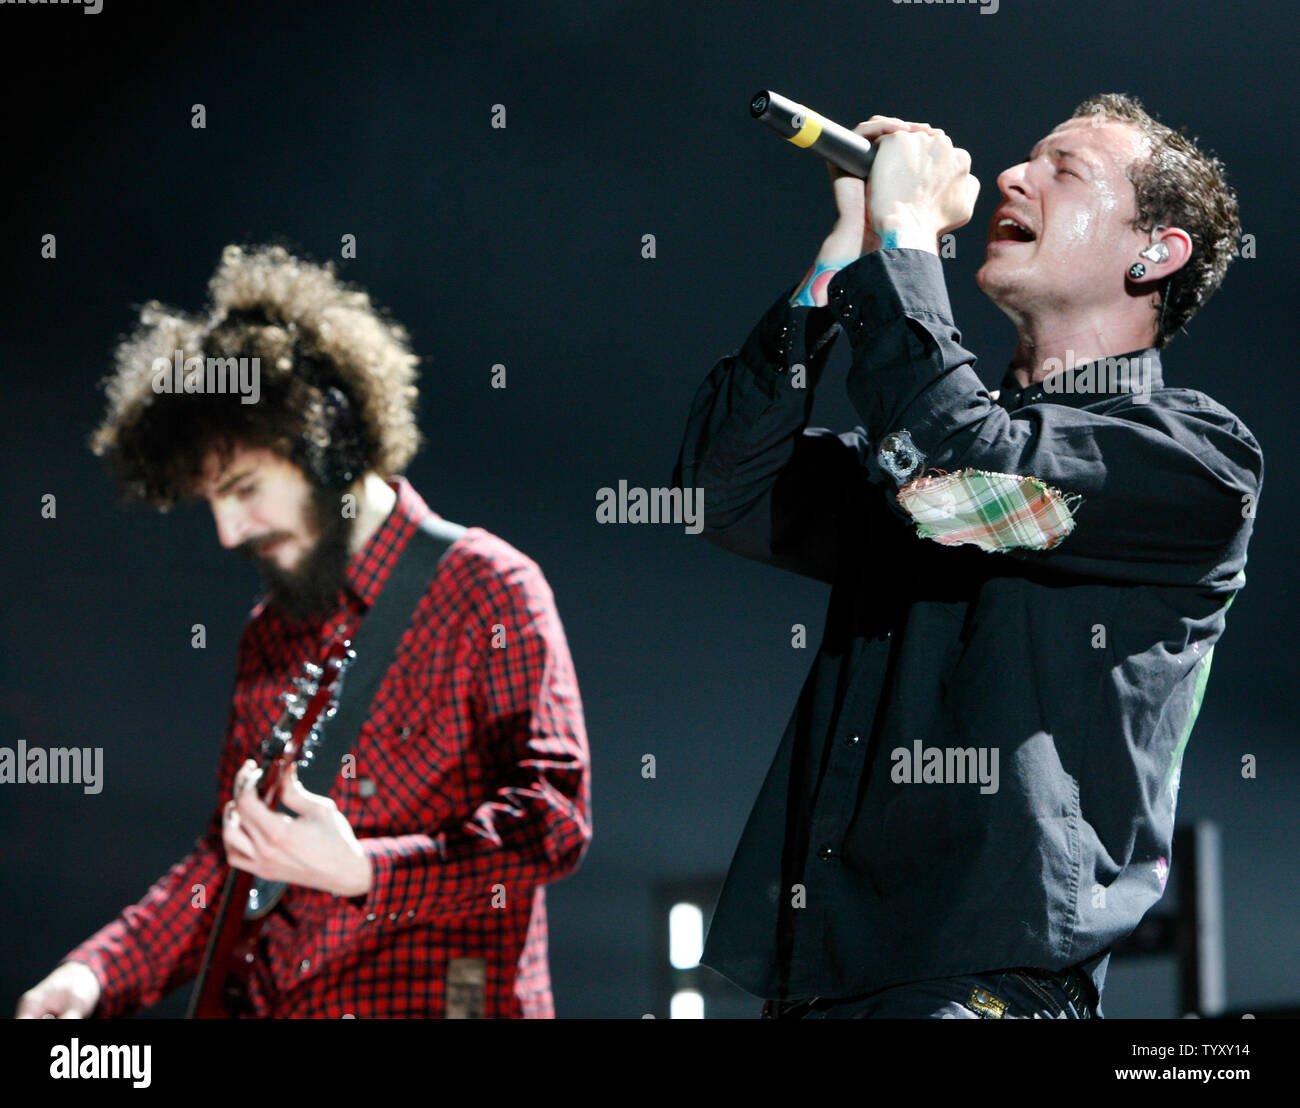 Singer Chester Bennington (R) and guitarist Brad Delson of the band Linkin Park perform in concert at Bercy in Paris on May 30, 2007.   (UPI Photo/David Silpa) Stock Photo